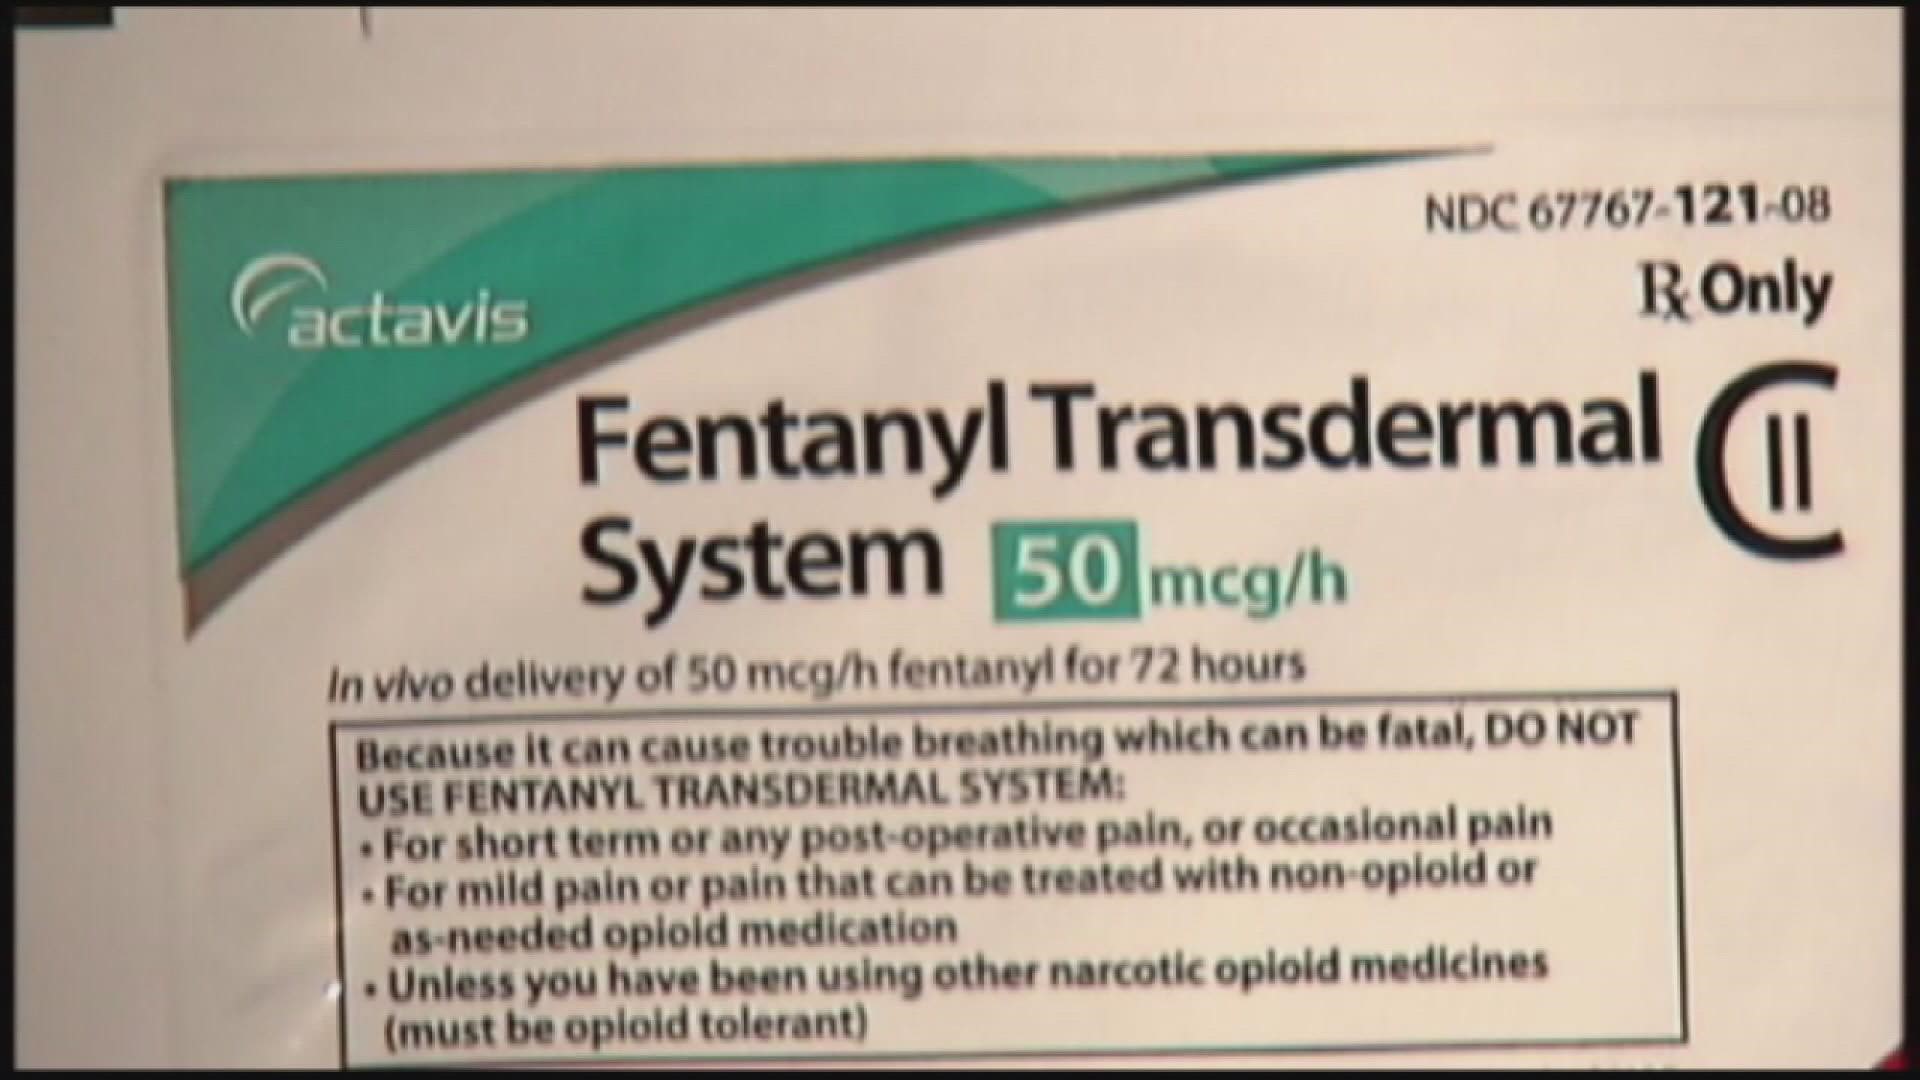 Fentanyl is a drug medical professionals use for treating severe pain, but when it isn't obtained legally the results can be lethal.